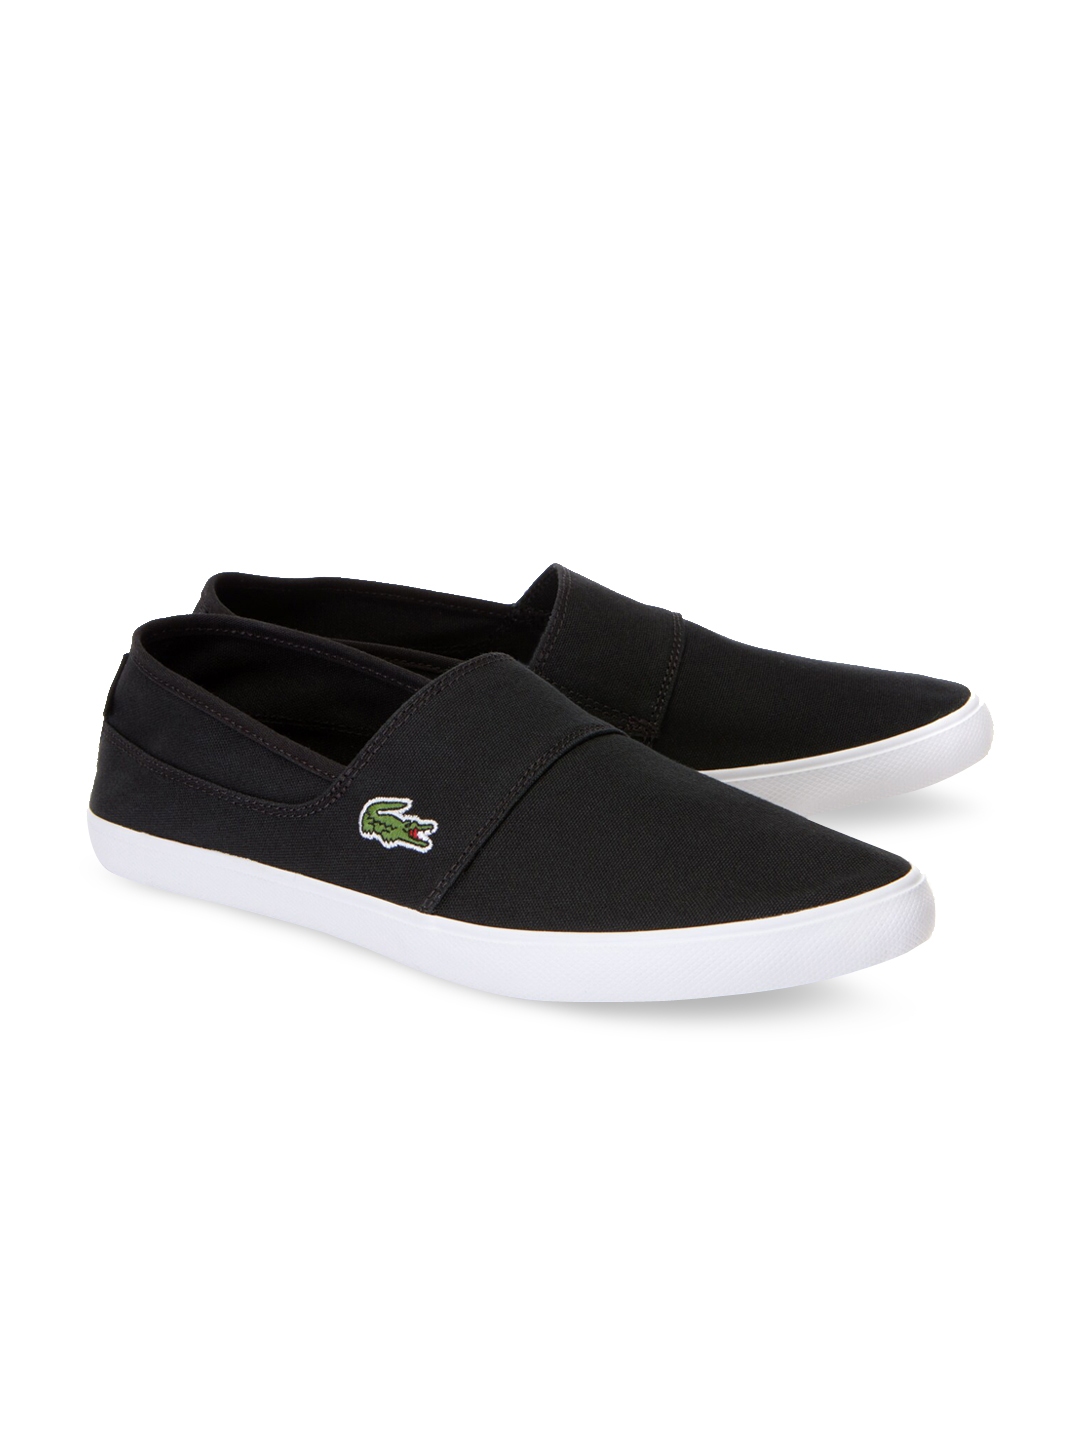 Buy Lacoste Men Black Marice Canvas Solid Slip On Sneakers - Casual ...